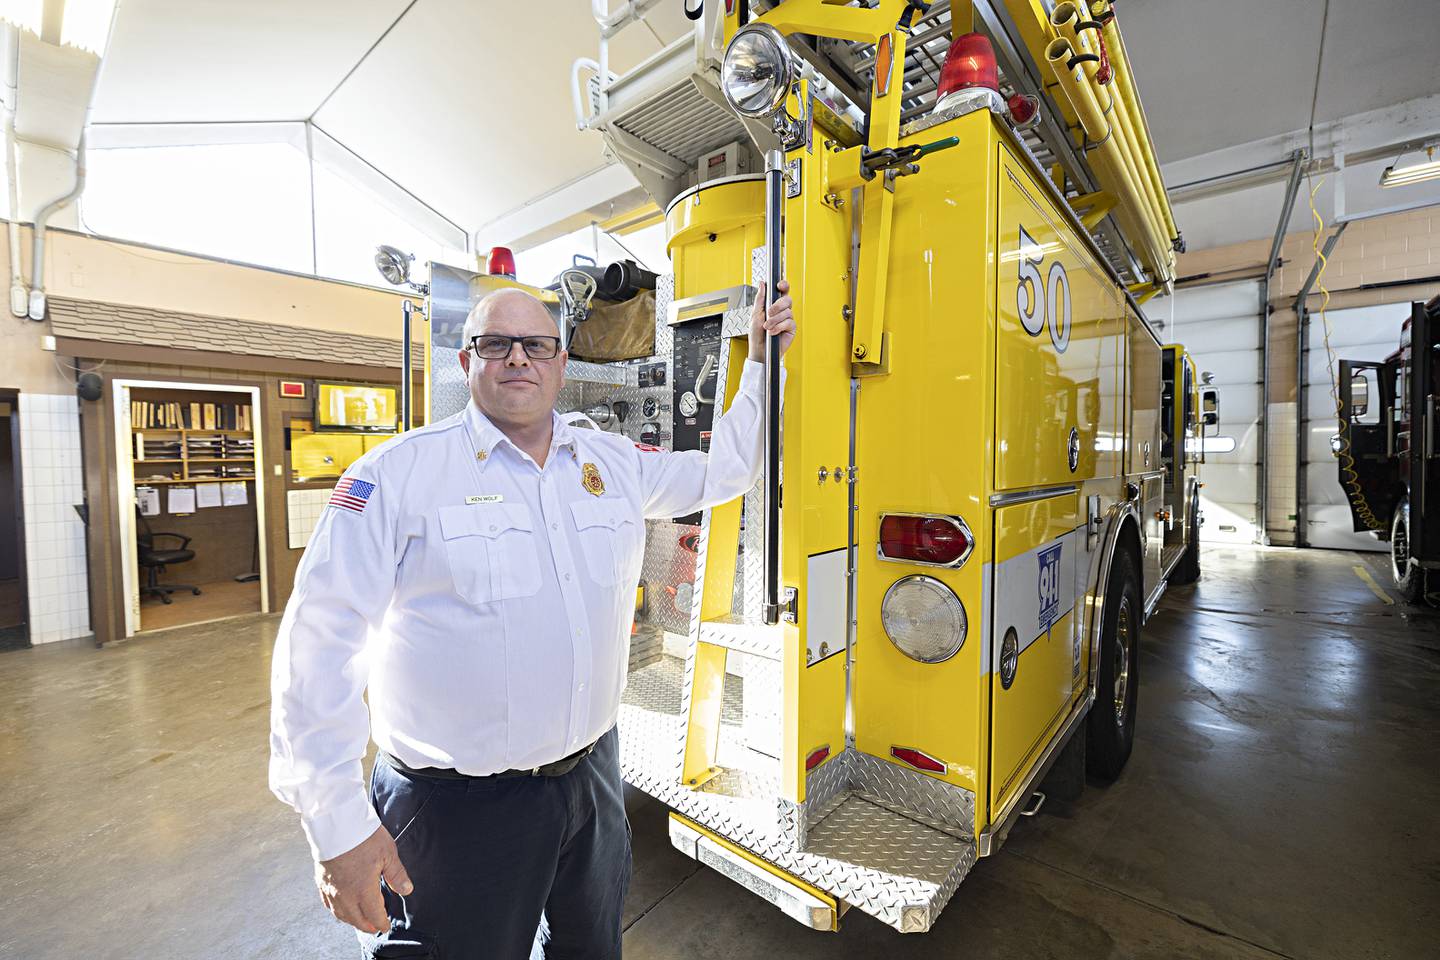 Deputy Chief Ken Wolf has been named fire chief to the Rock Falls Fire Department.